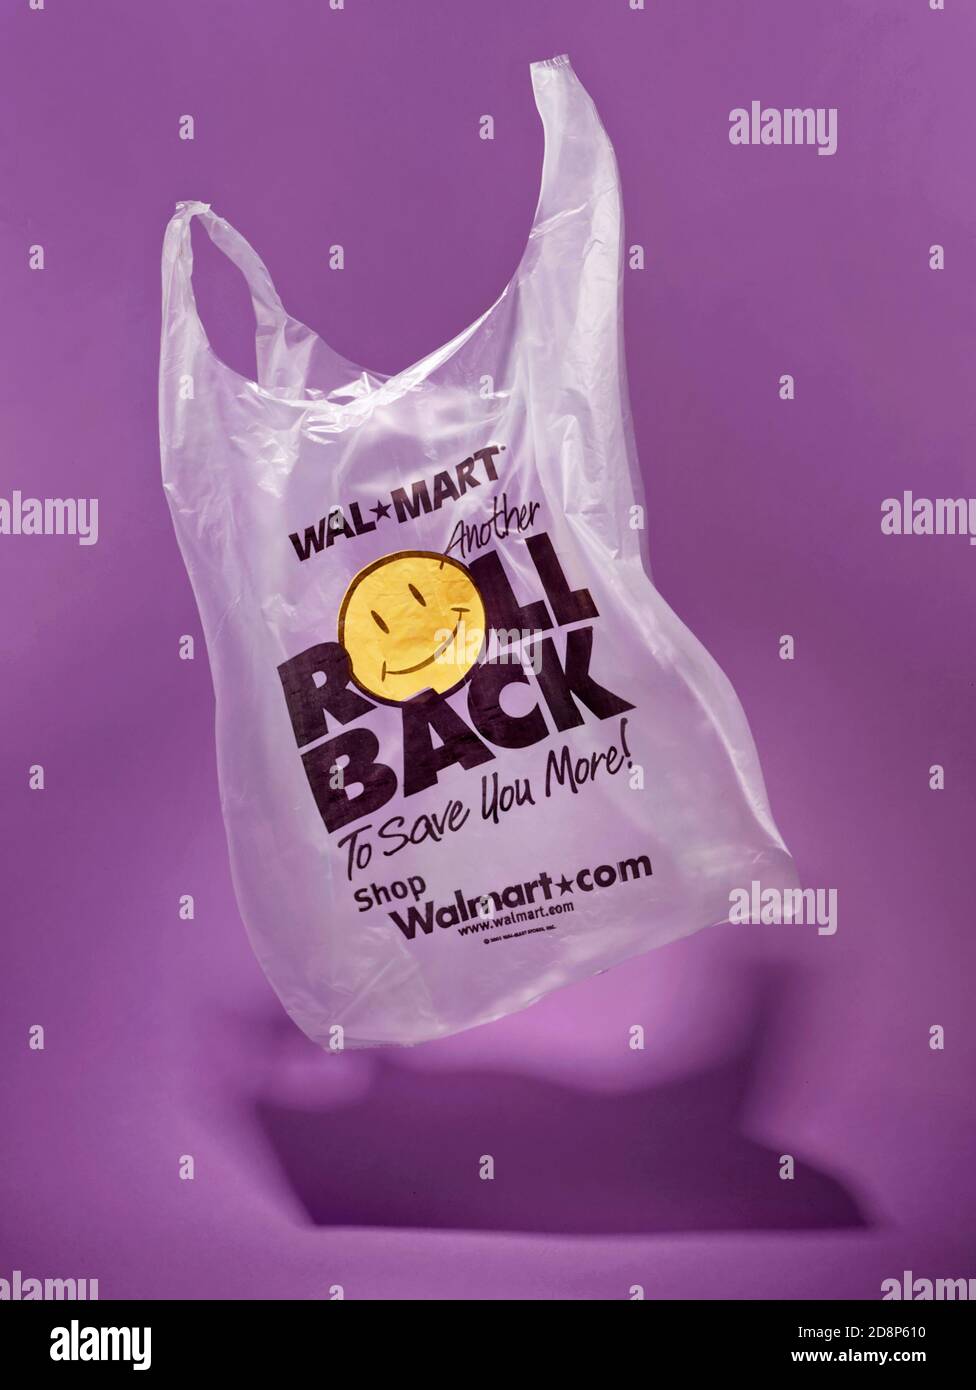 Roll back Walmart grocery bag floating photographed on a purple background Stock Photo